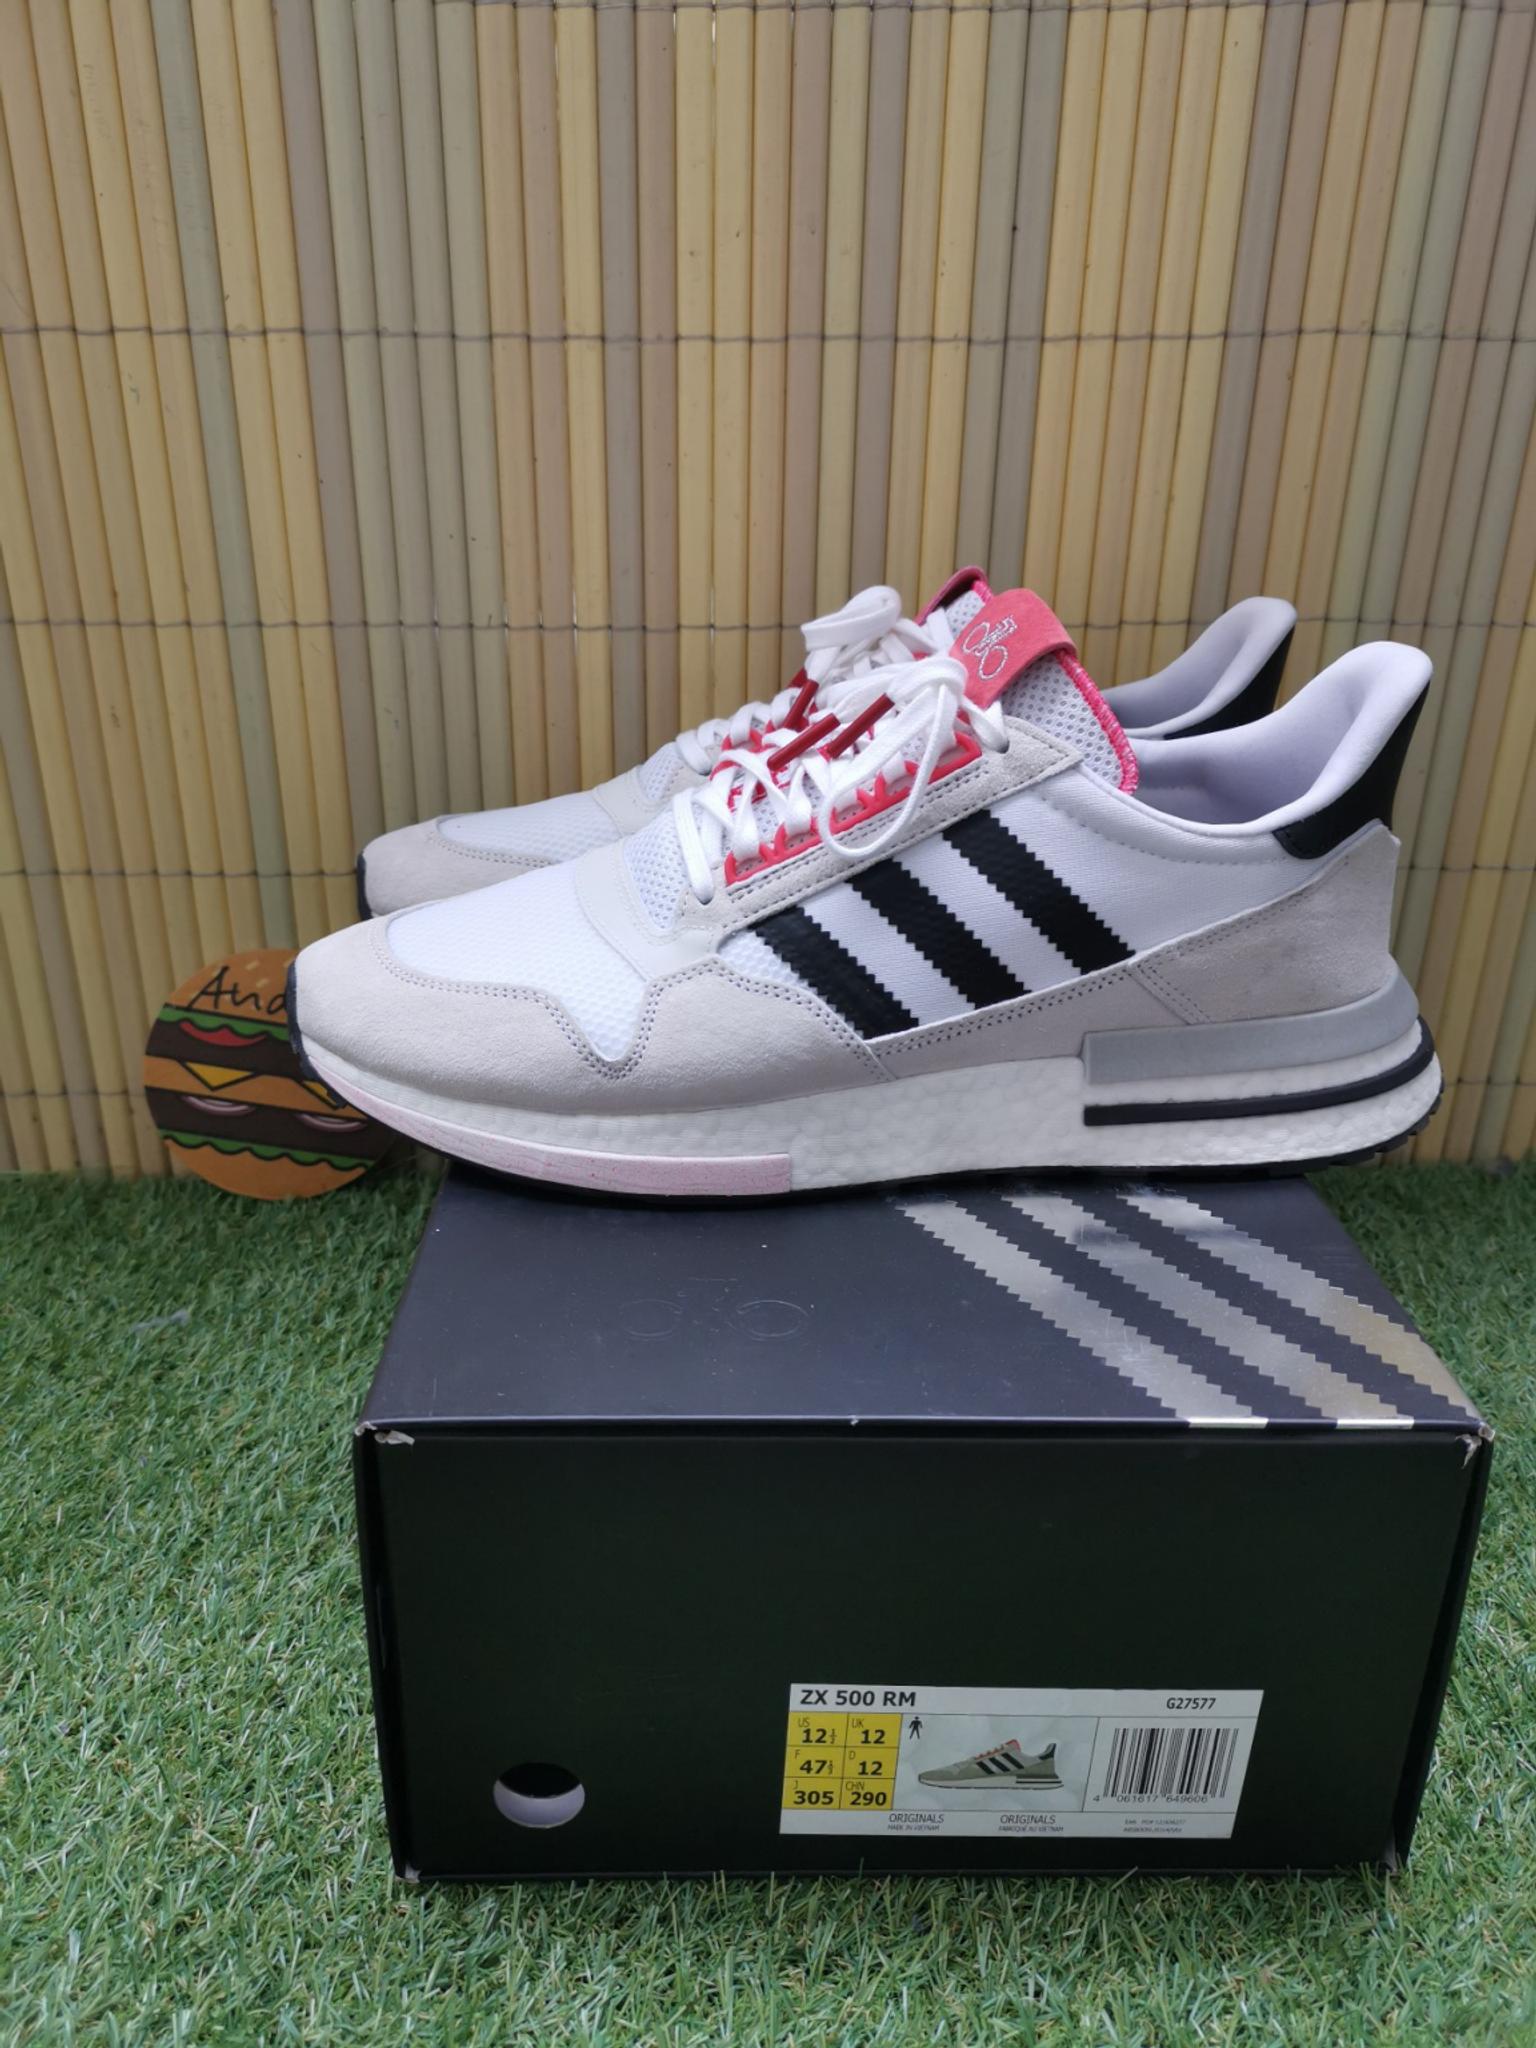 Adidas zx 500 rm yungjiu boost us12,5 in 40213 Düsseldorf for €100.00 for  sale | Shpock